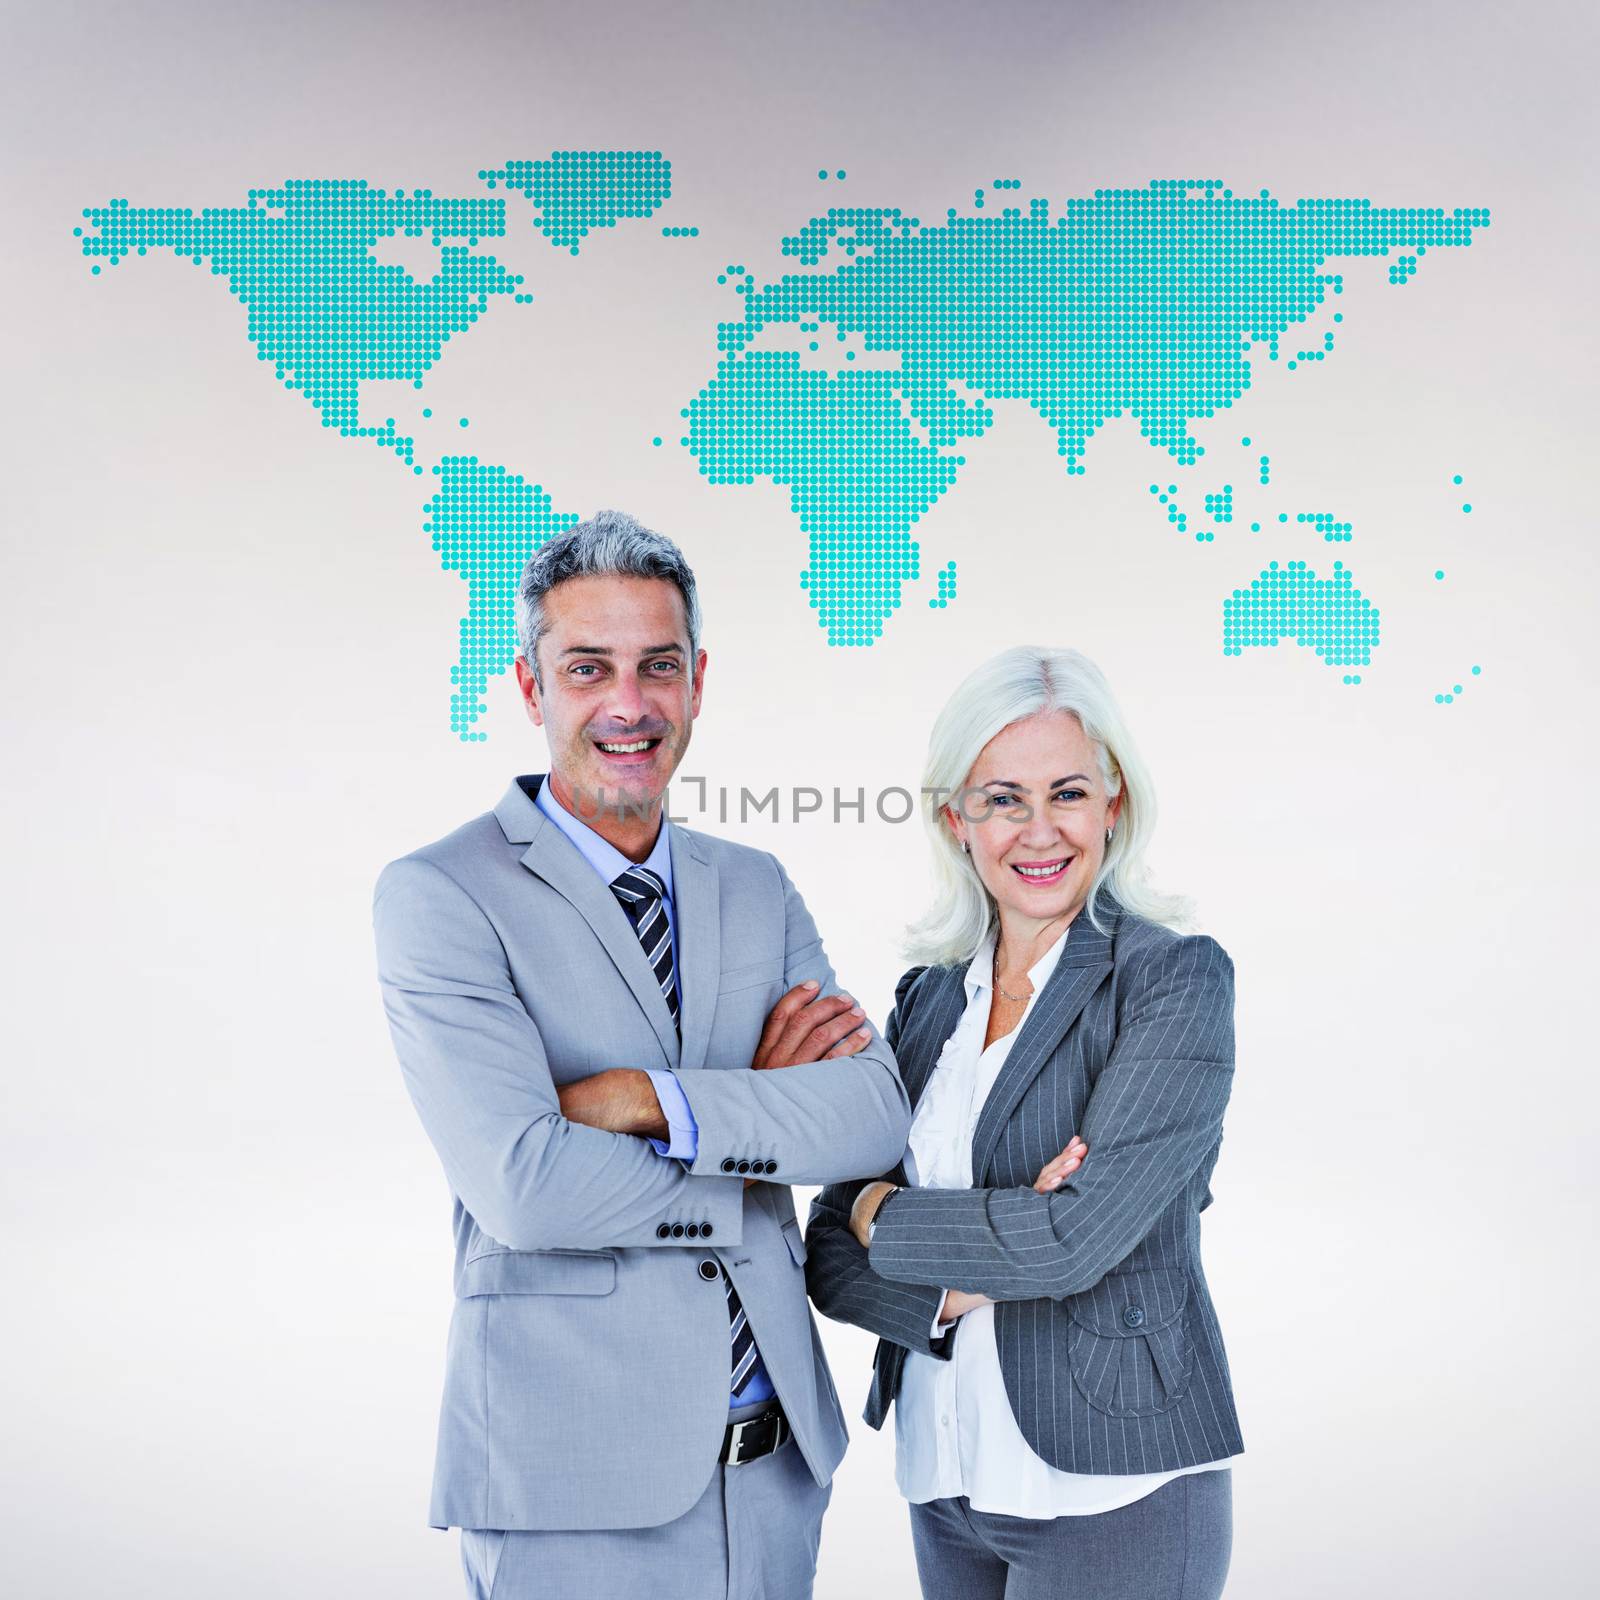 Smiling businesswoman and man with arms crossed against green world map on white background